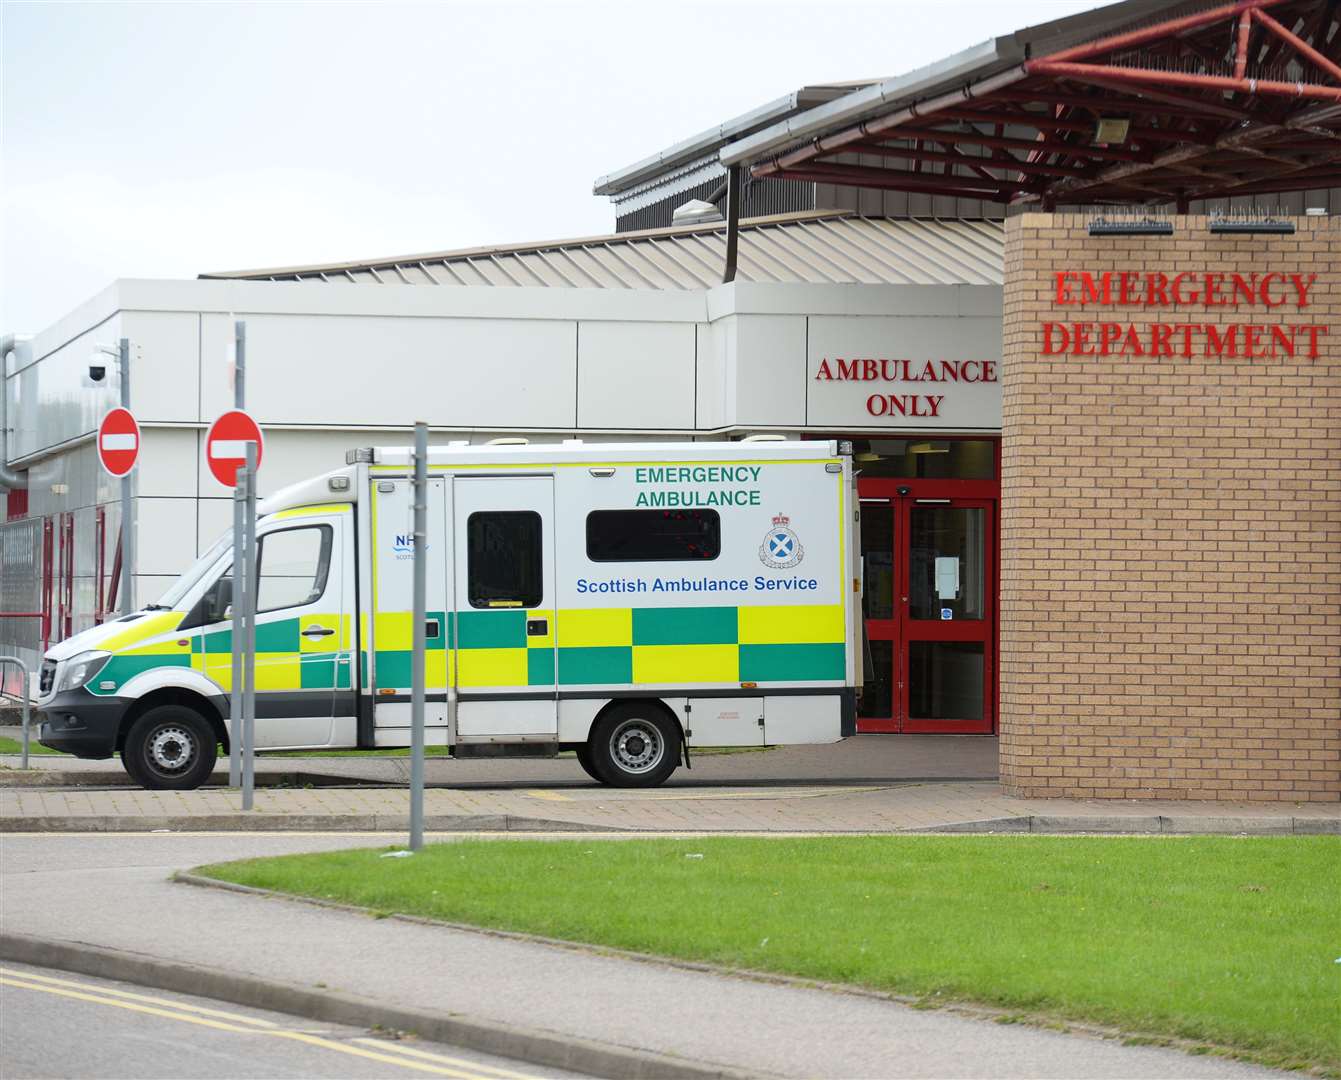 Accident and Emergency is facing high demand, prompting an appeal for patience and use of NHS 24 for less urgent situations.